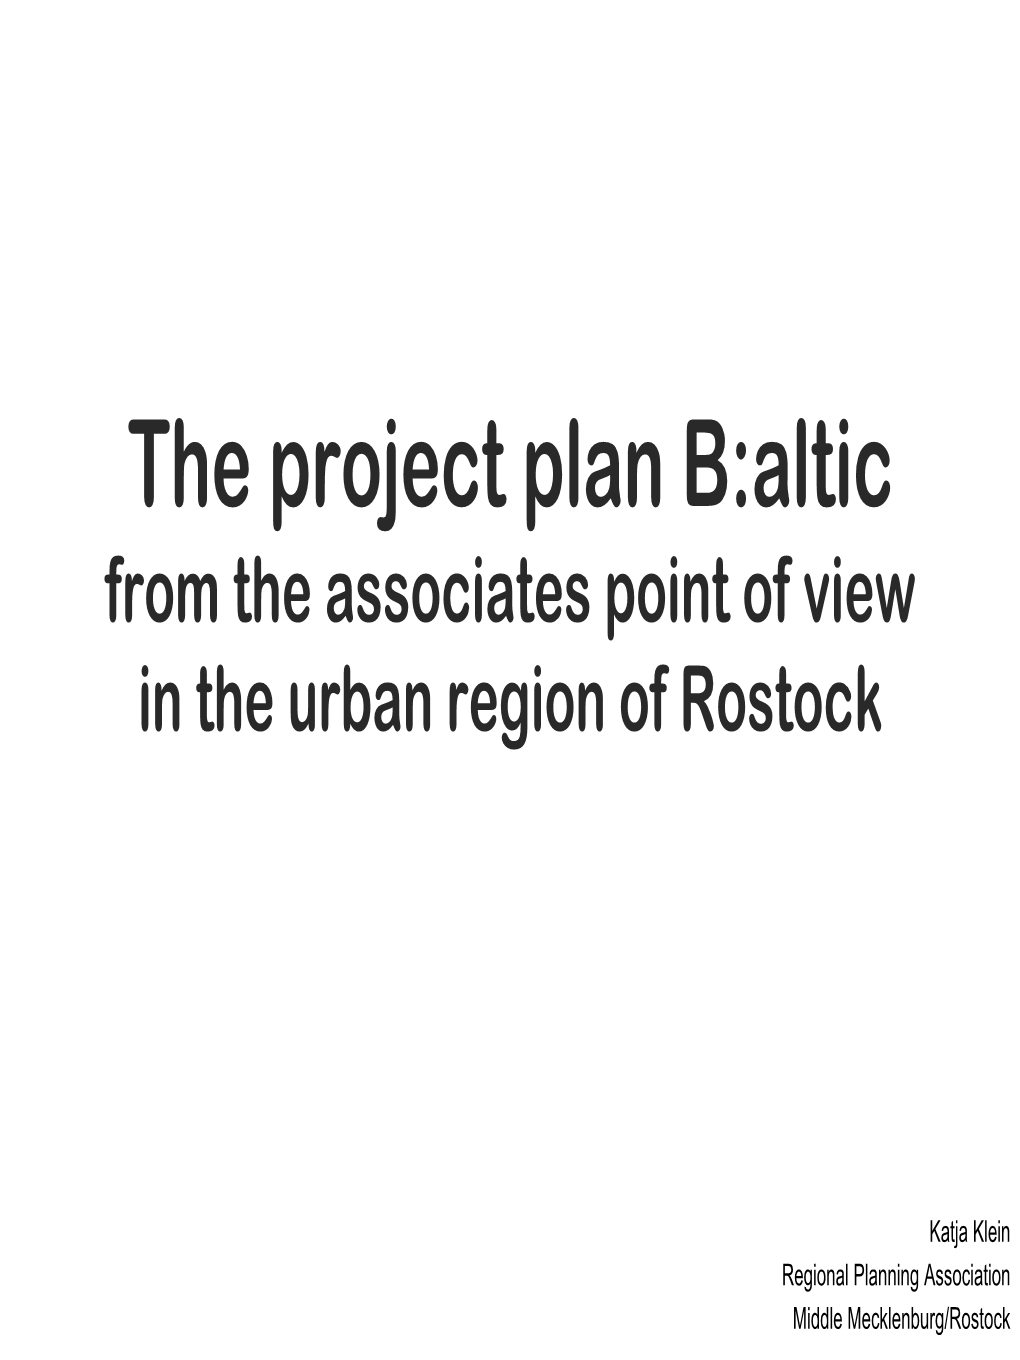 The Project Plan B:Altic from the Associates Point of View in the Urban Region of Rostock